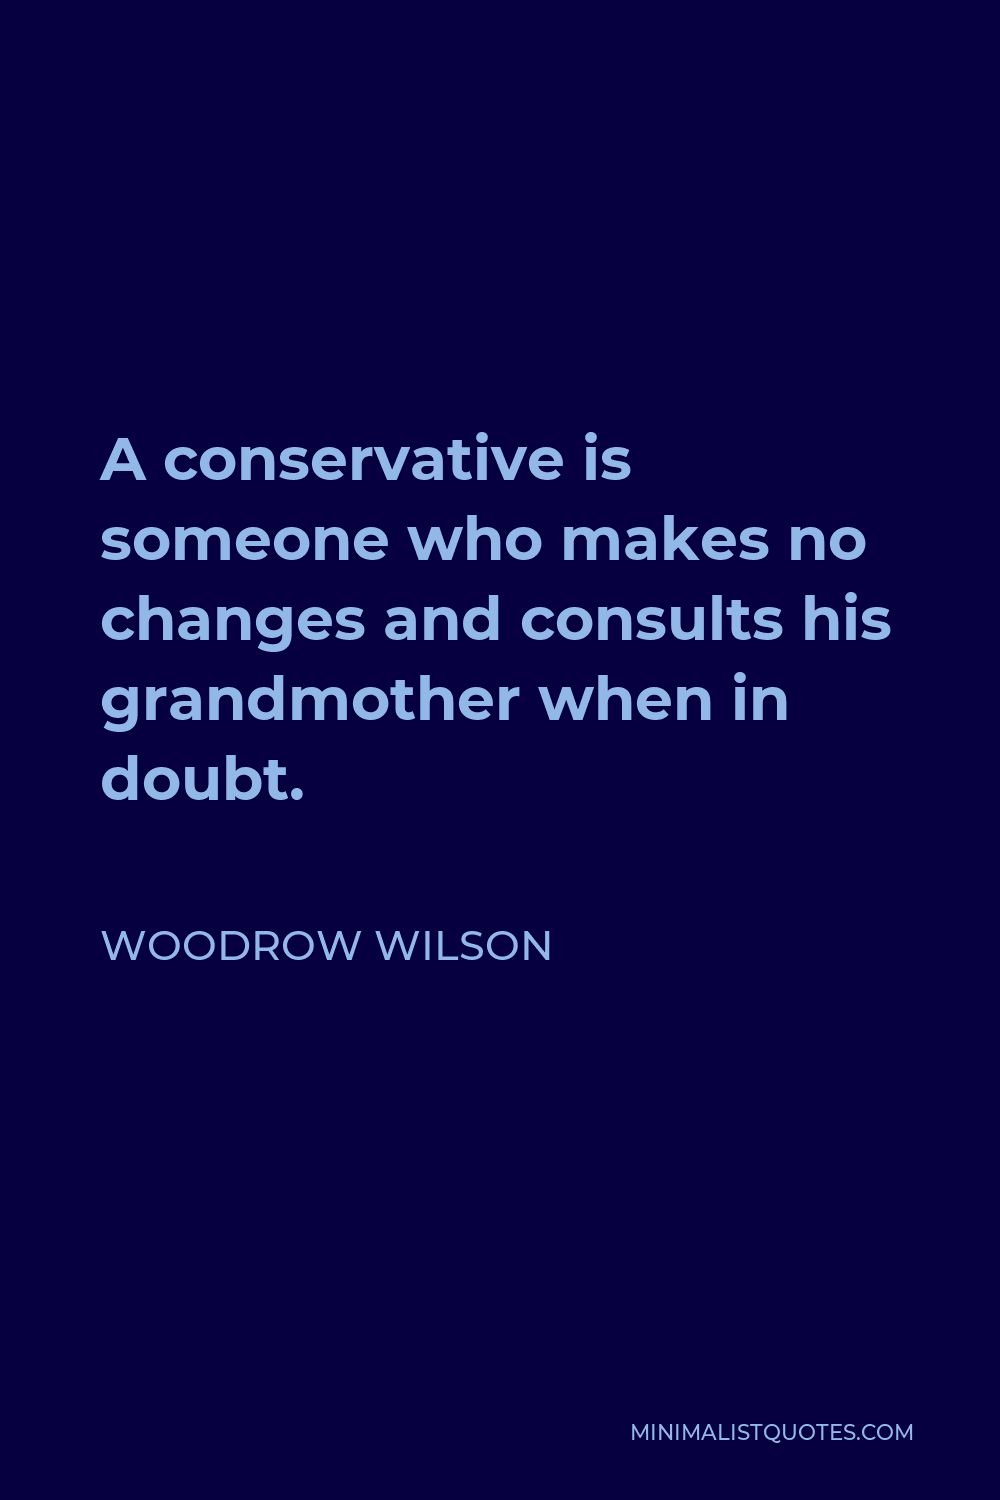 Woodrow Wilson Quote - A conservative is someone who makes no changes and consults his grandmother when in doubt.